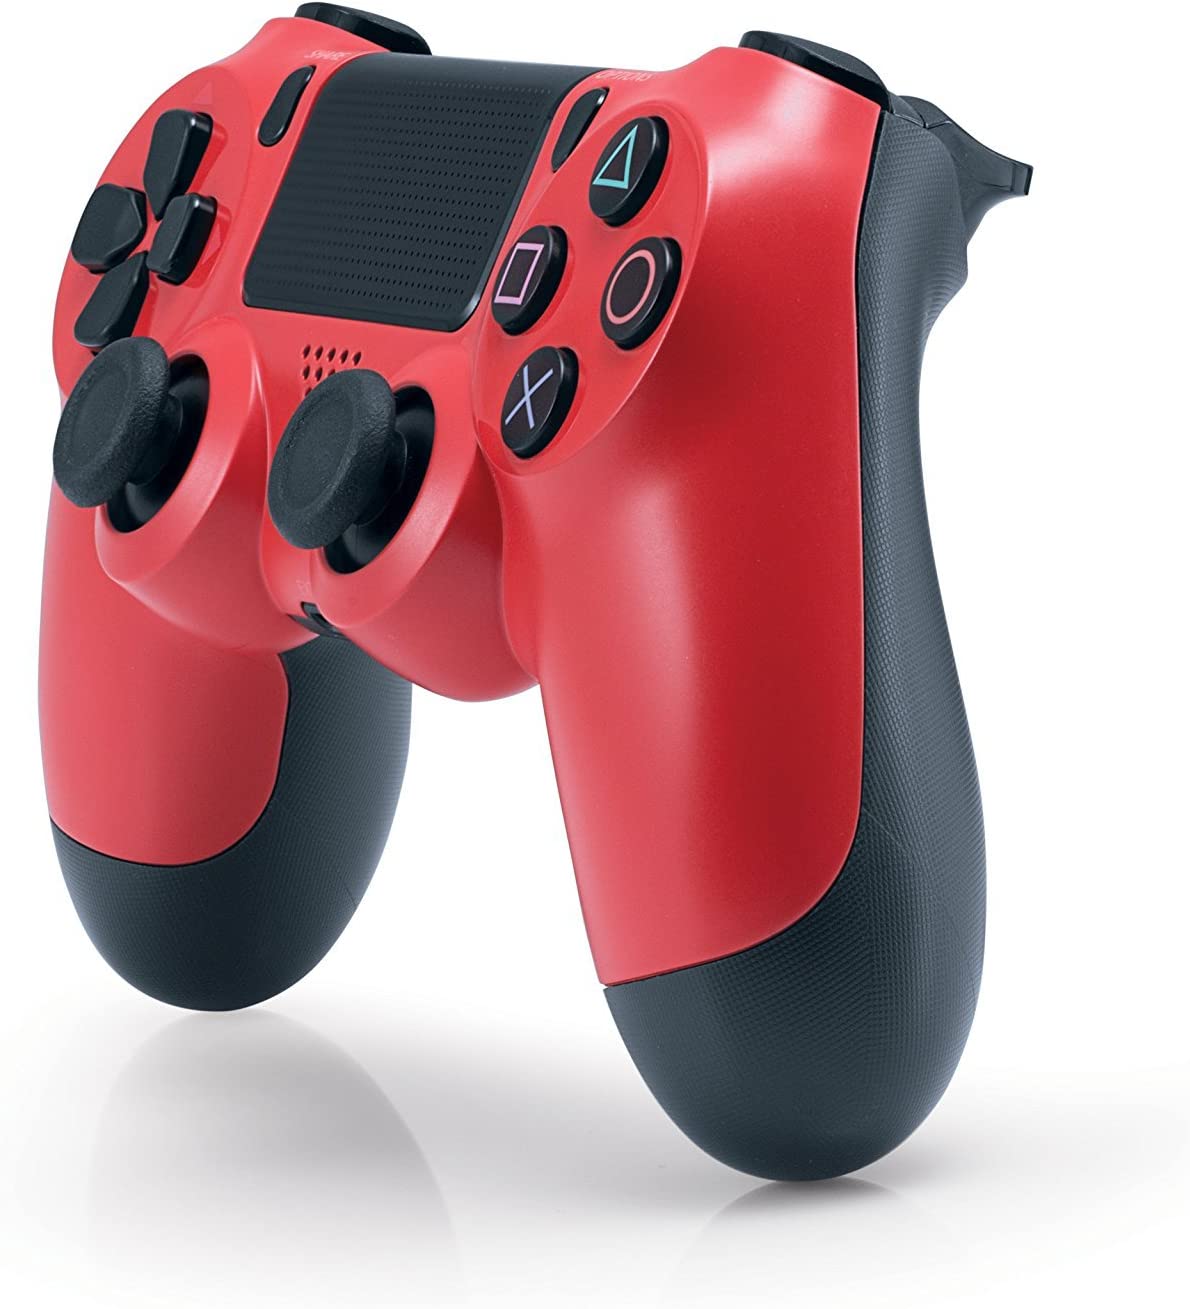 Sony Playstation wireless Dual Shock 4 Controller for PS4 - Red